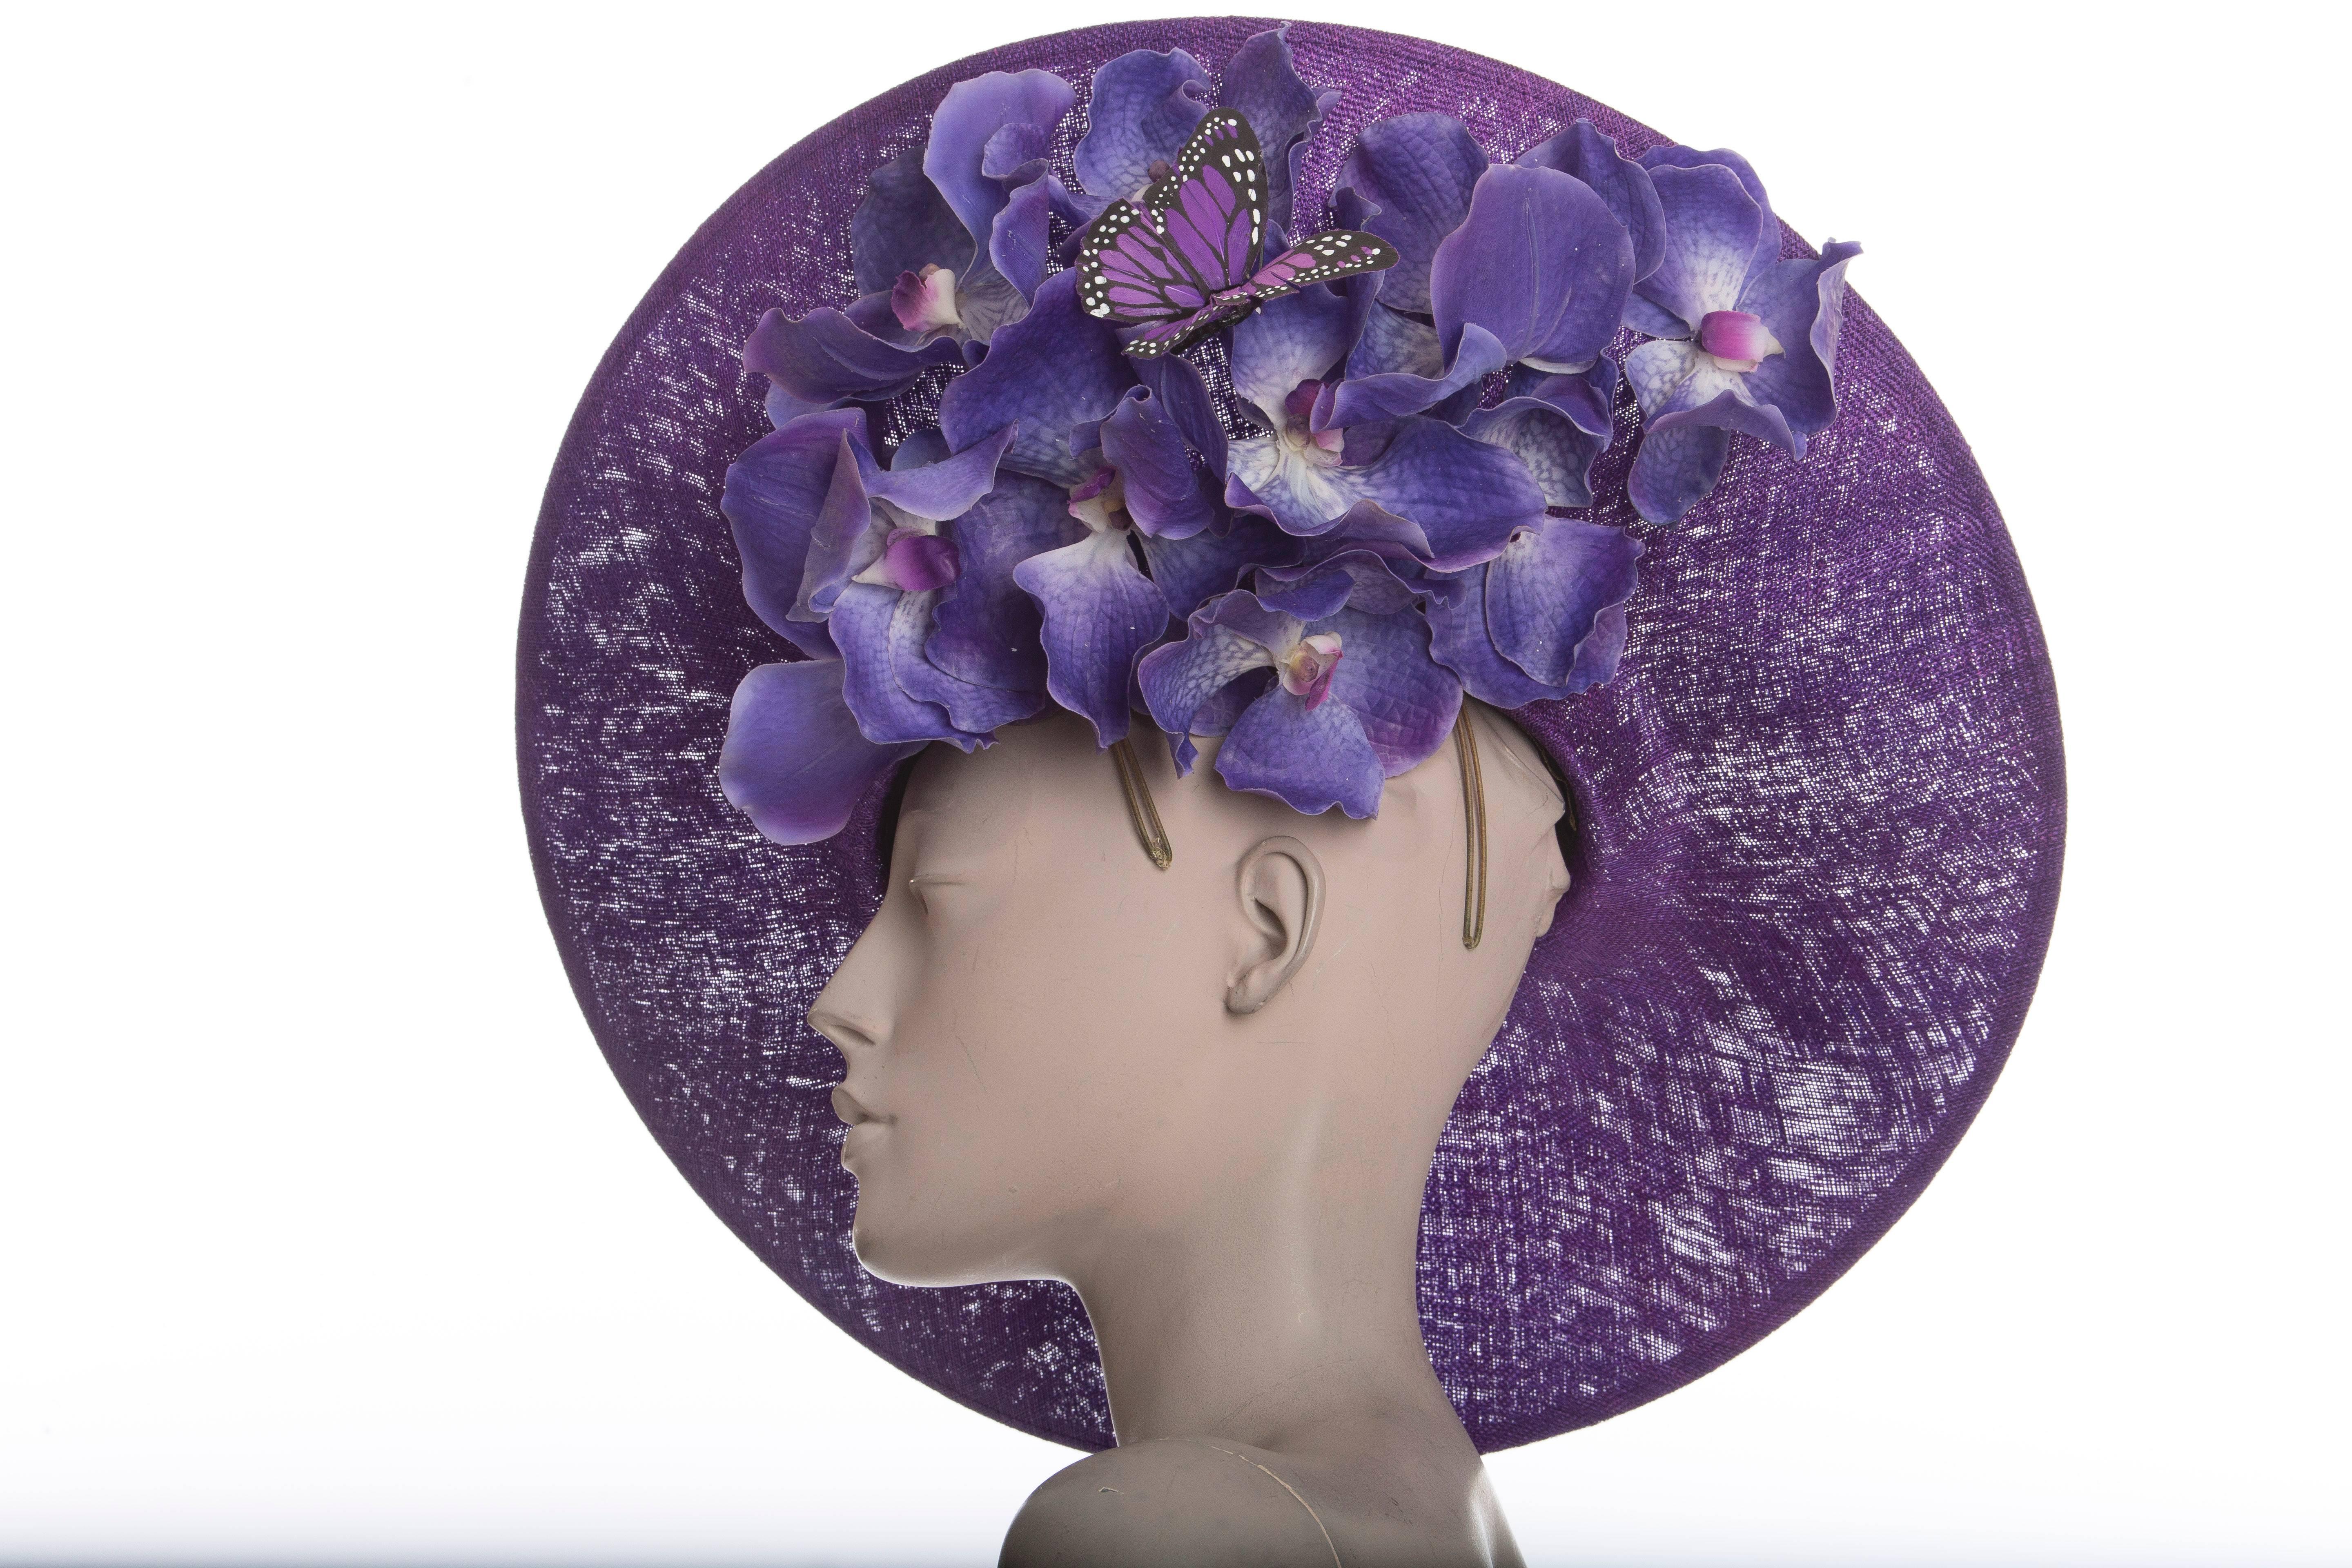 Philip Treacy, circa 2012, sinamay side slice hat with orchids and butterfly from the 